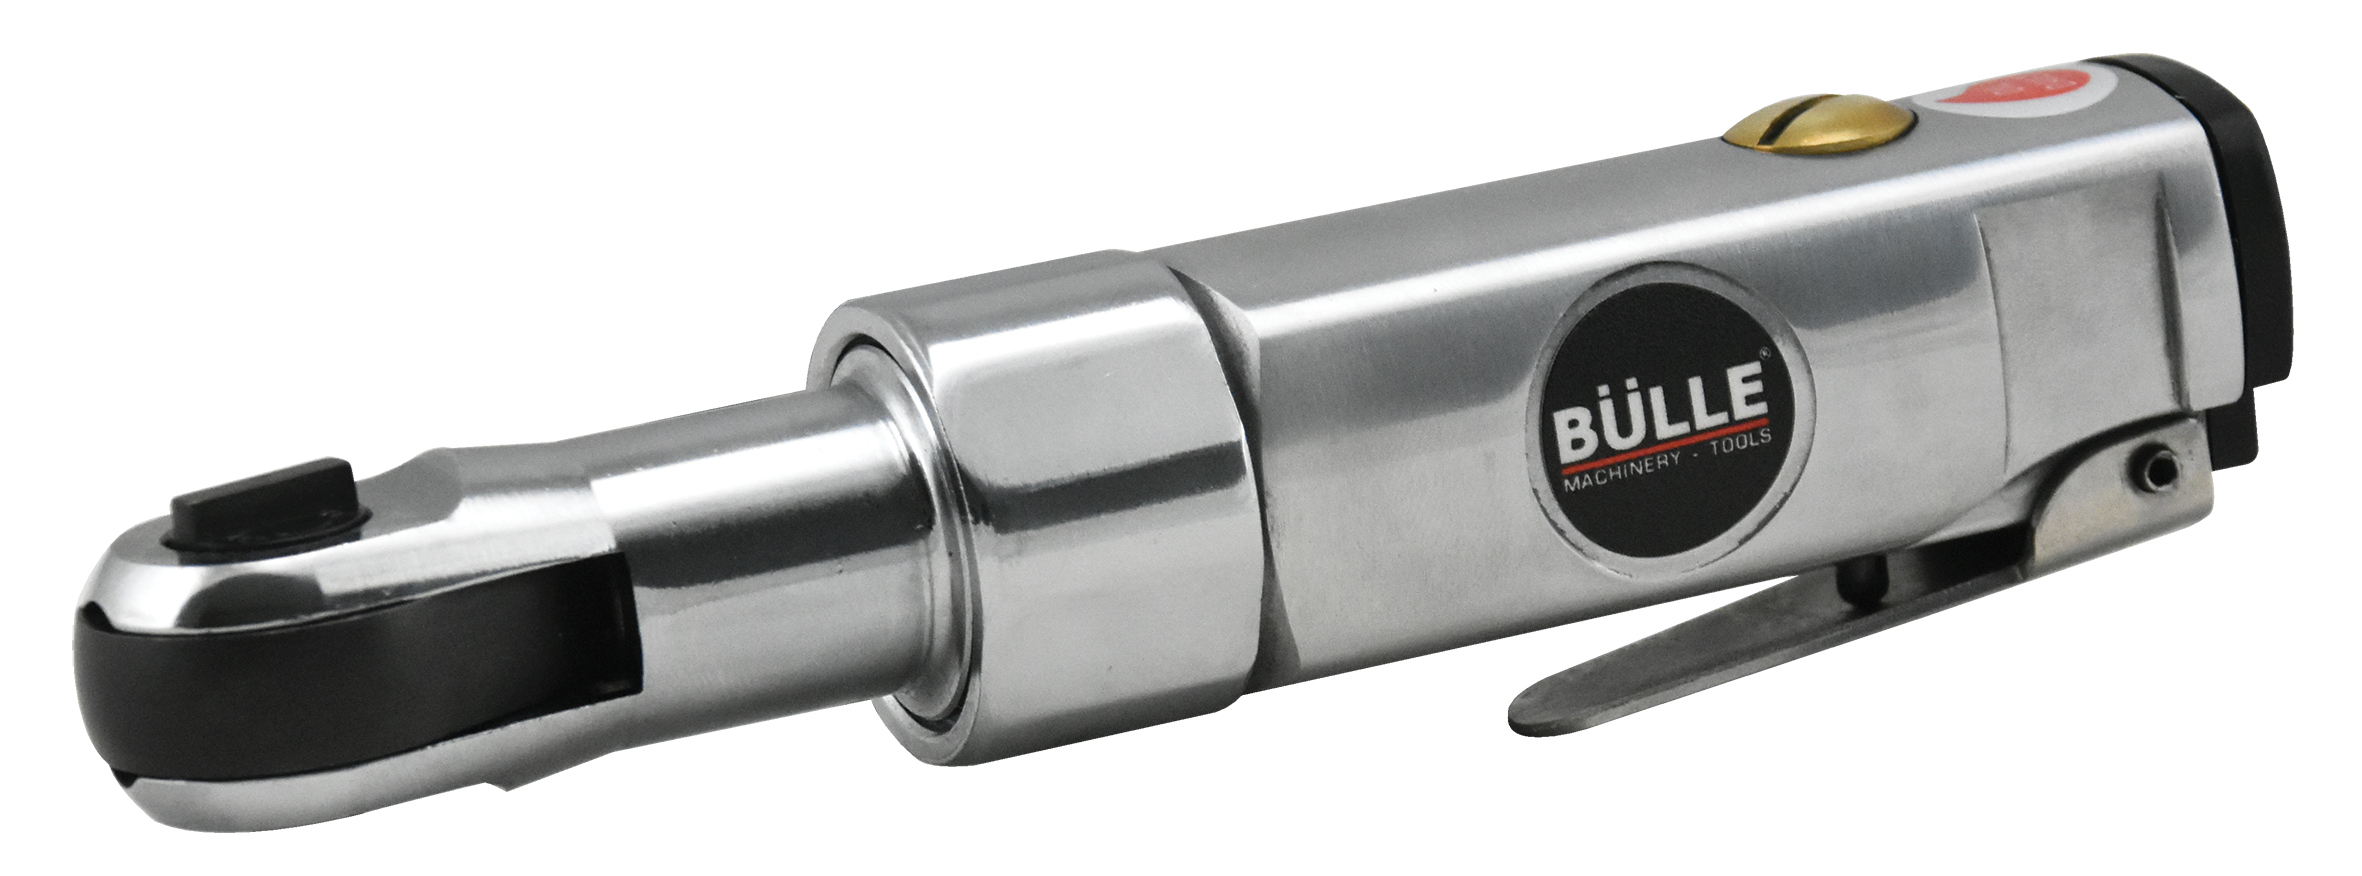 Air Ratchet Wrench 1/4'' Bulle